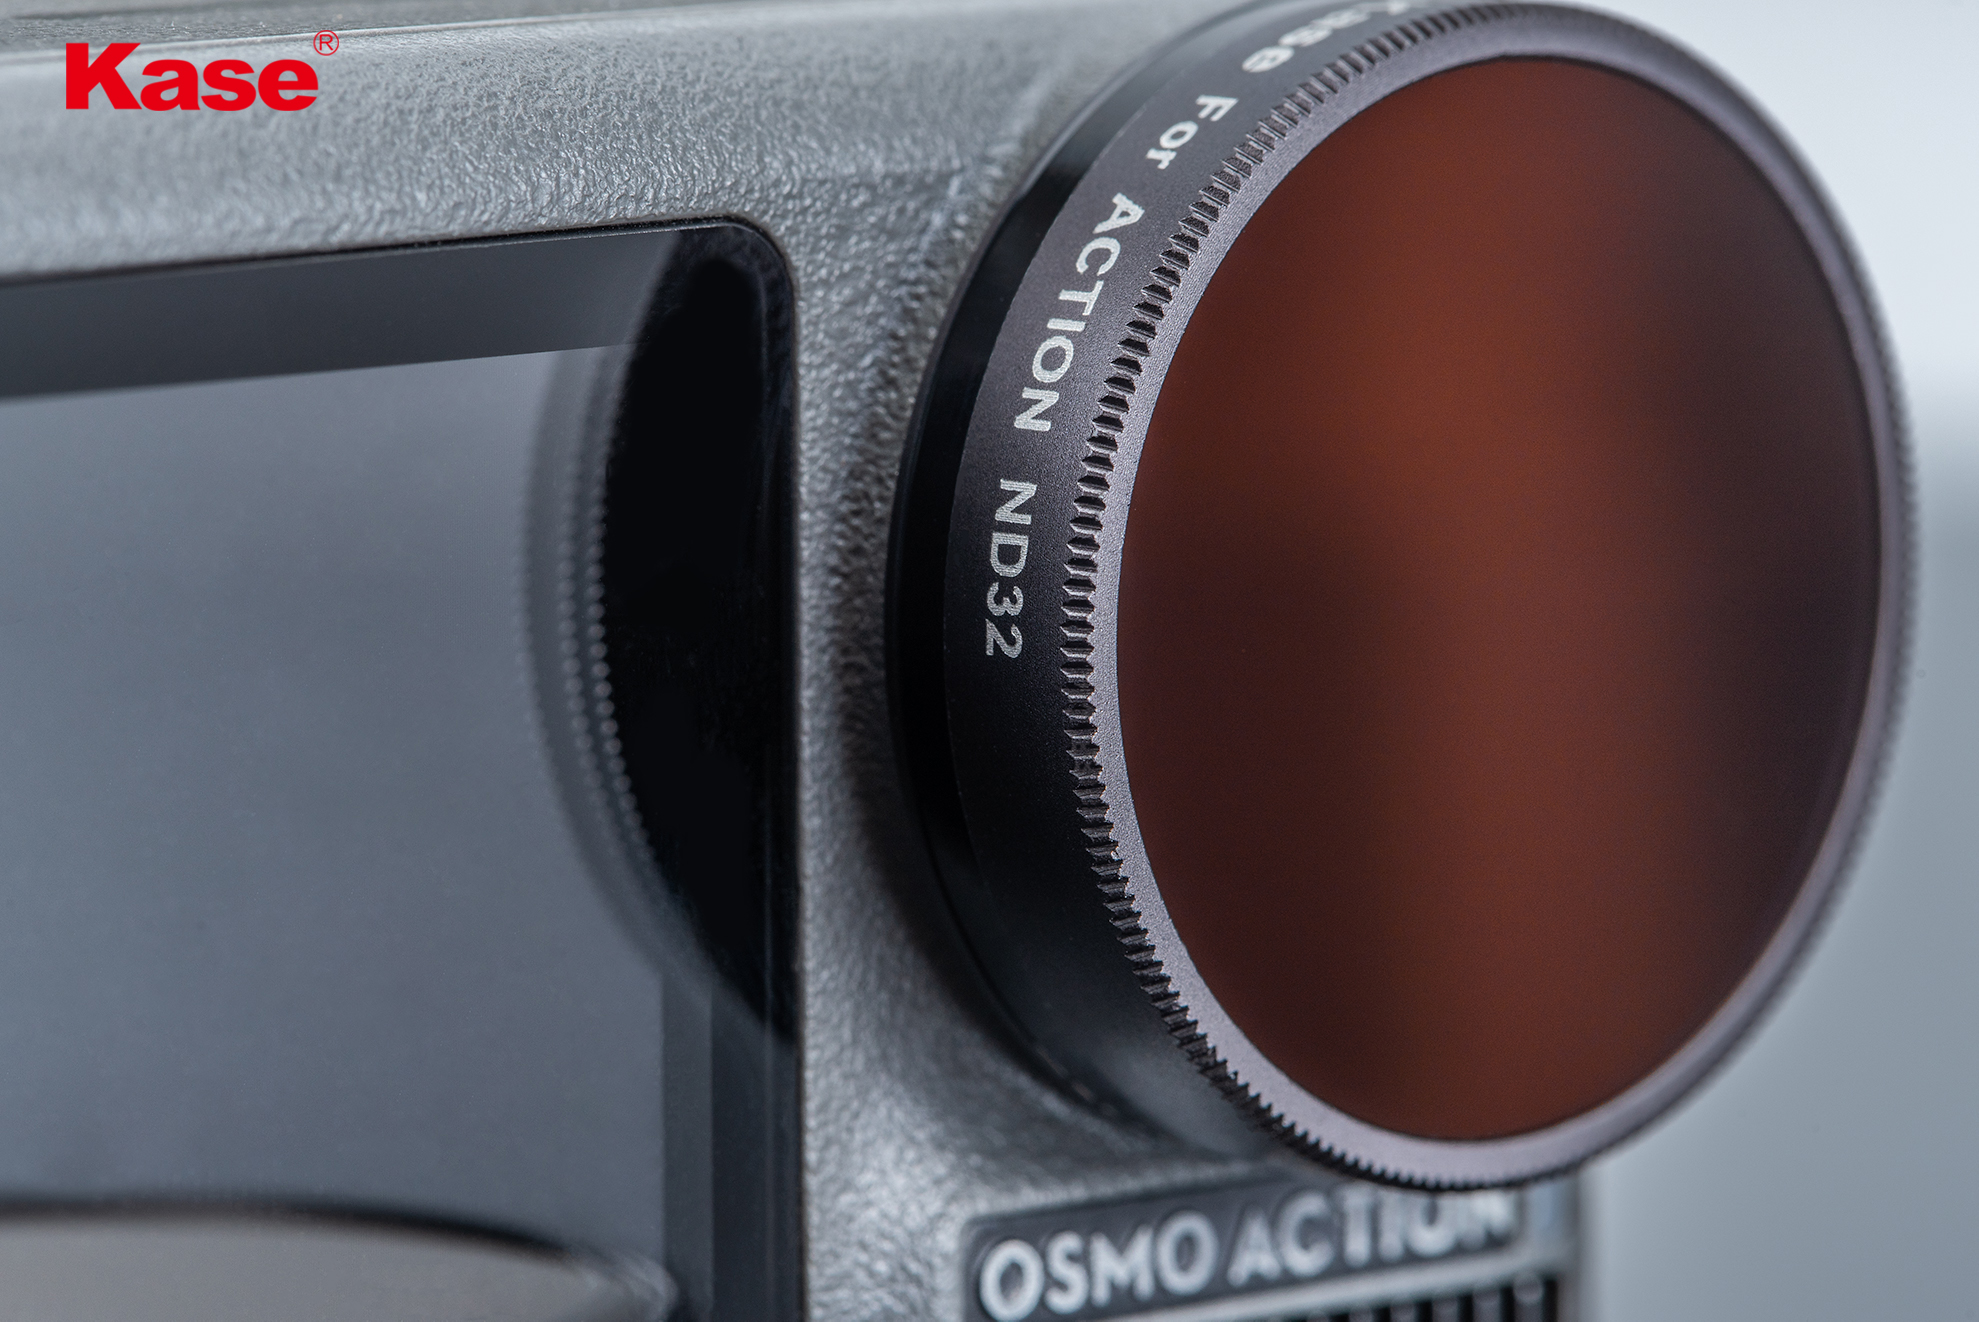 nd-for-osmo-action-5-kase-osmo-action-nd.jpg